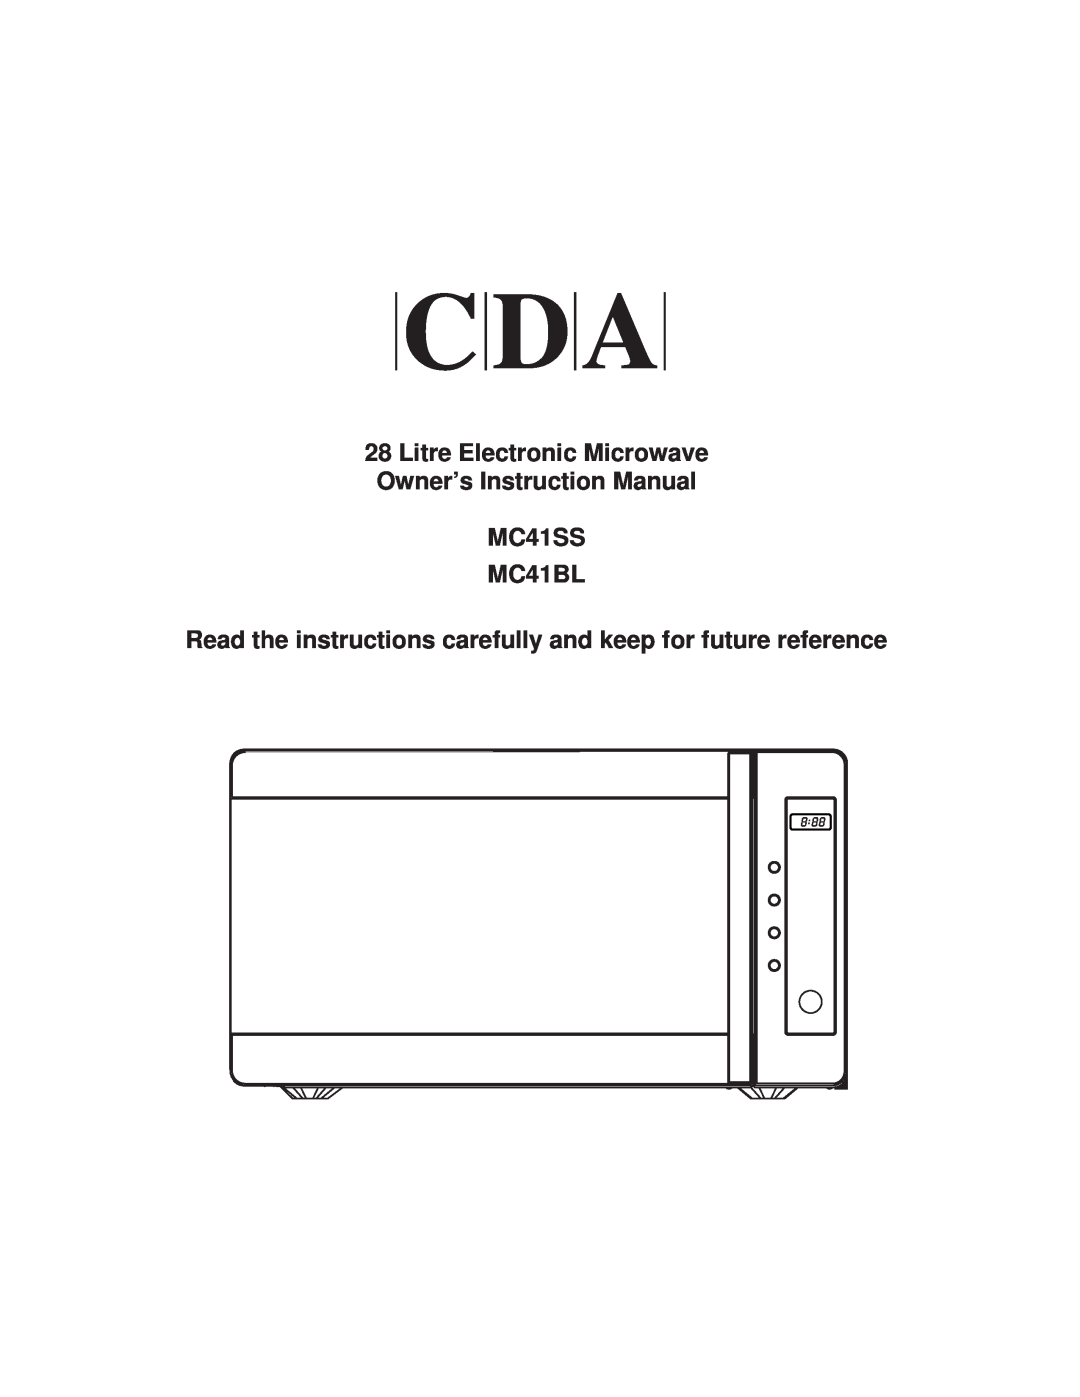 CDA instruction manual Litre Electronic Microwave, Owner’s Instruction Manual MC41SS MC41BL 